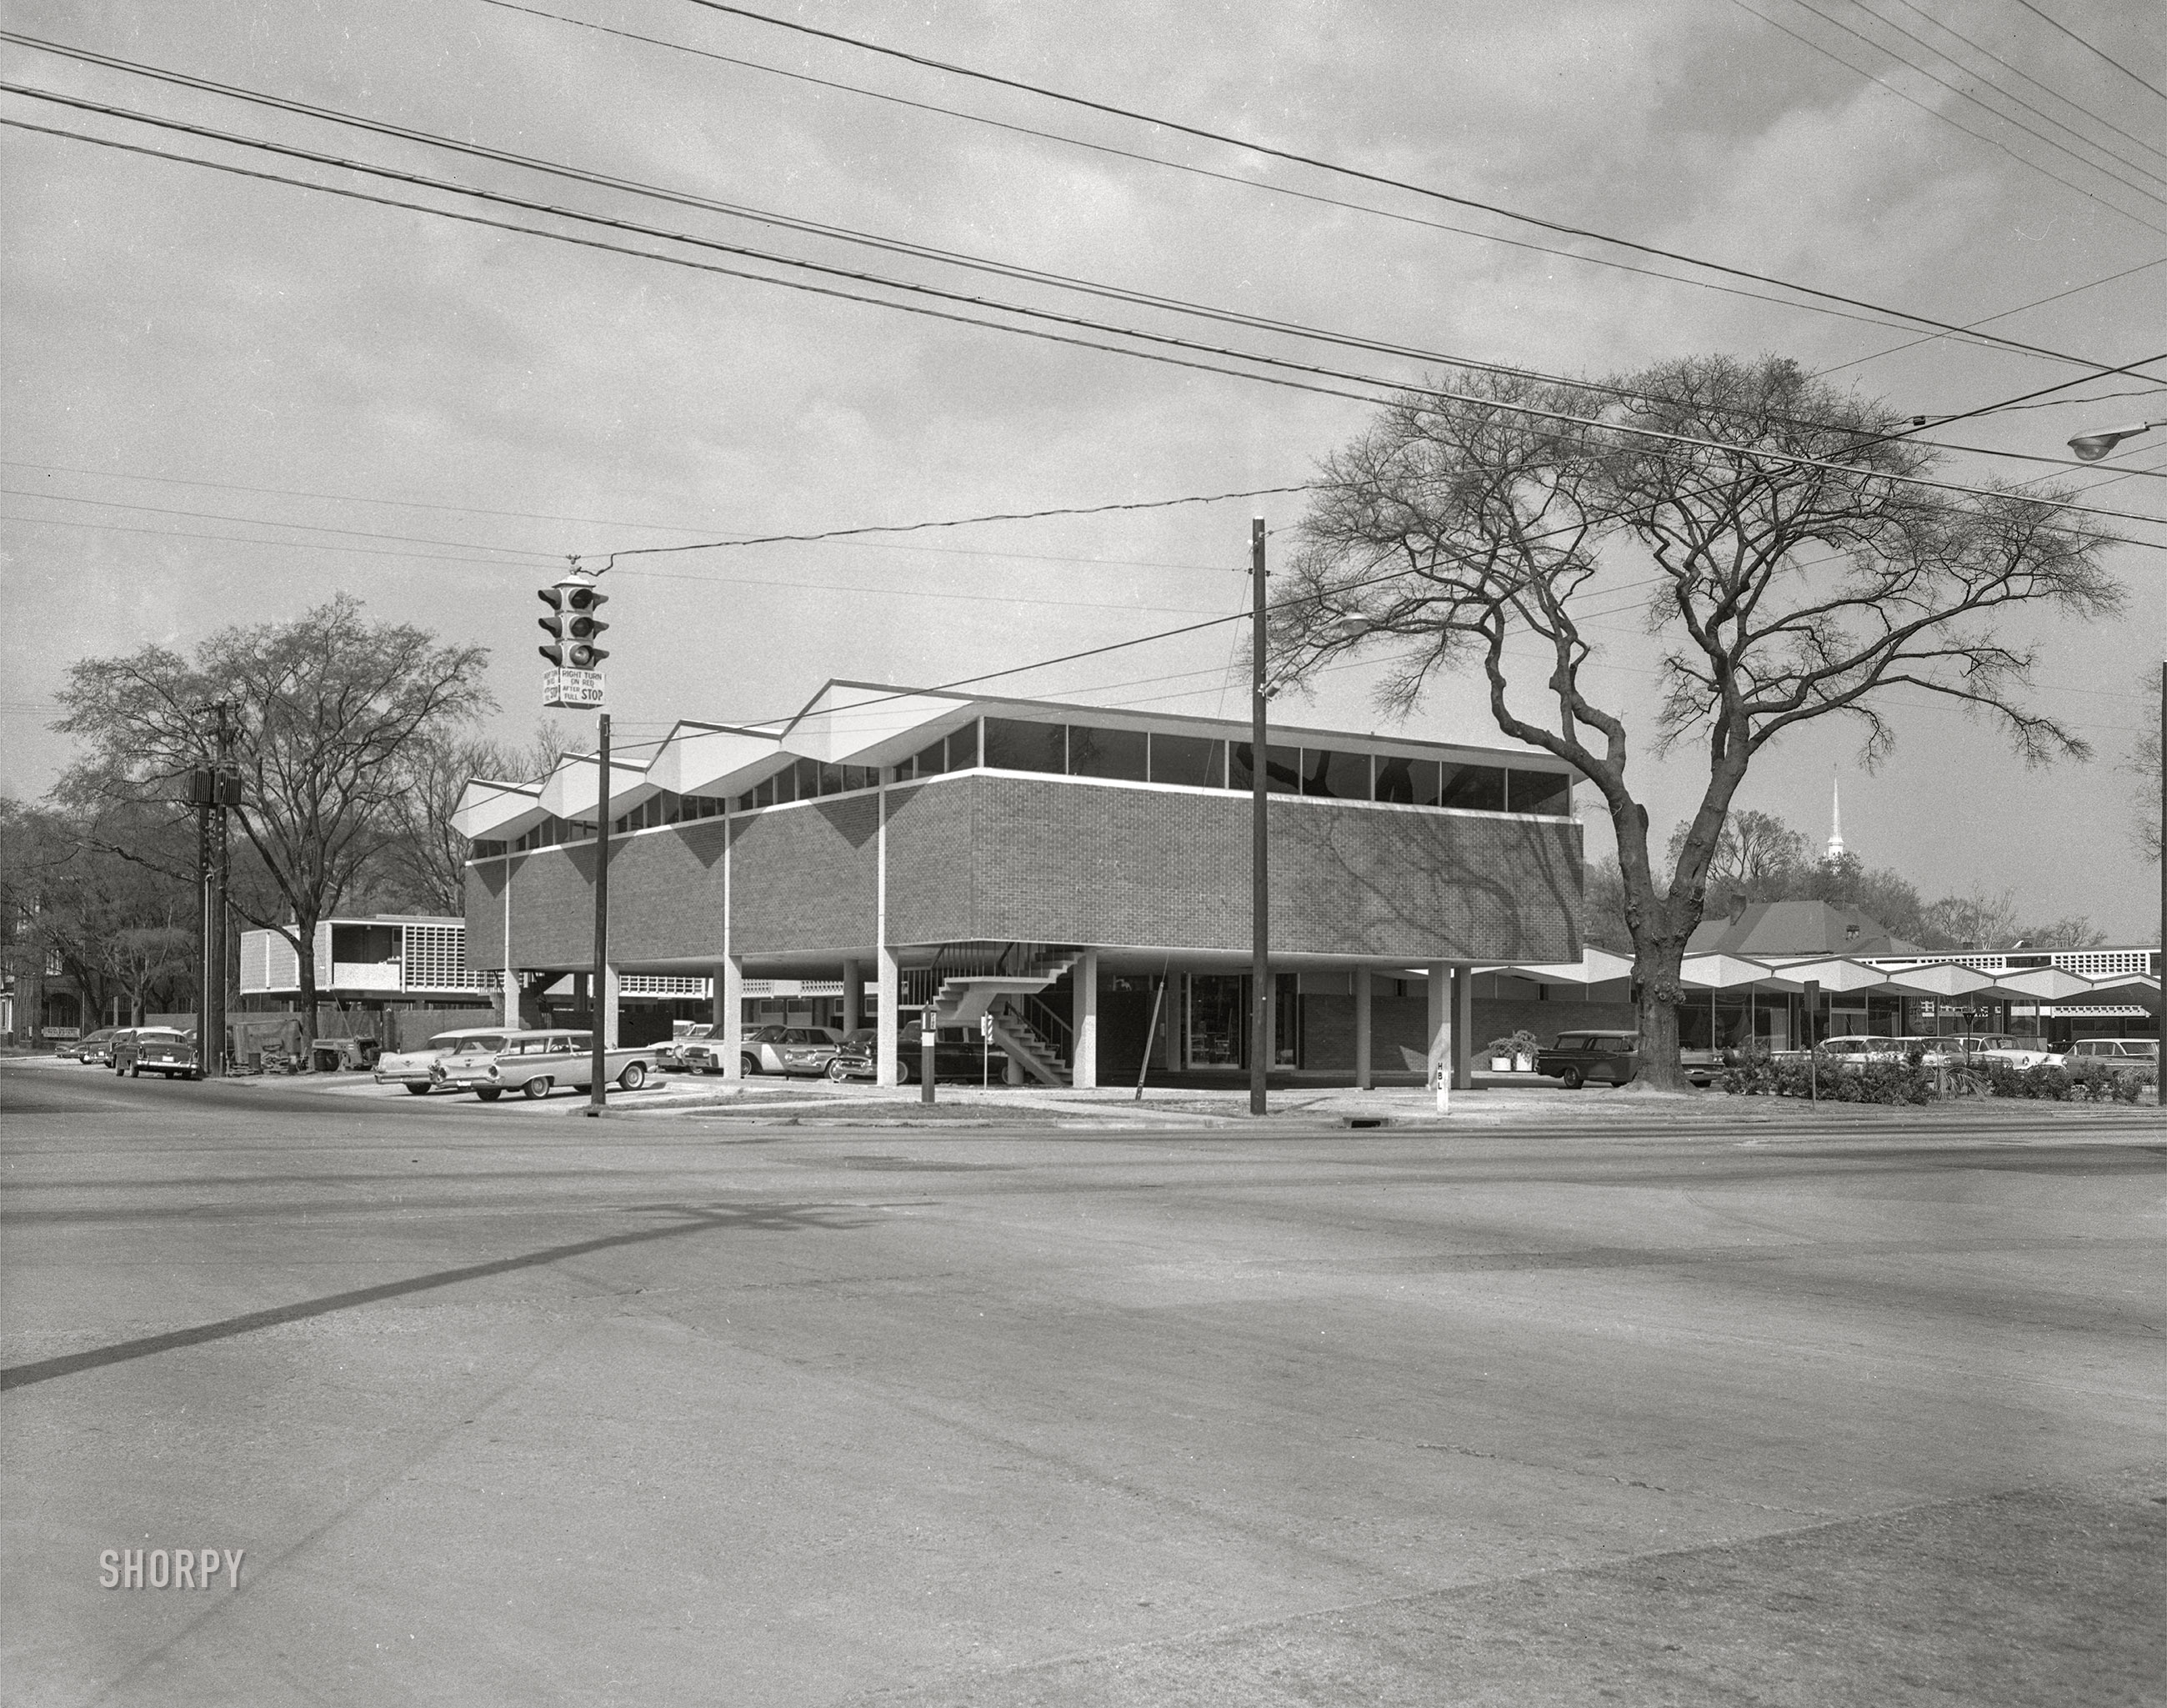 Columbus, Georgia, circa 1962. Our second look at the Martinique Motor Hotel, last seen here from different spatial and seasonal vantages. 4x5 inch acetate negative. View full size.